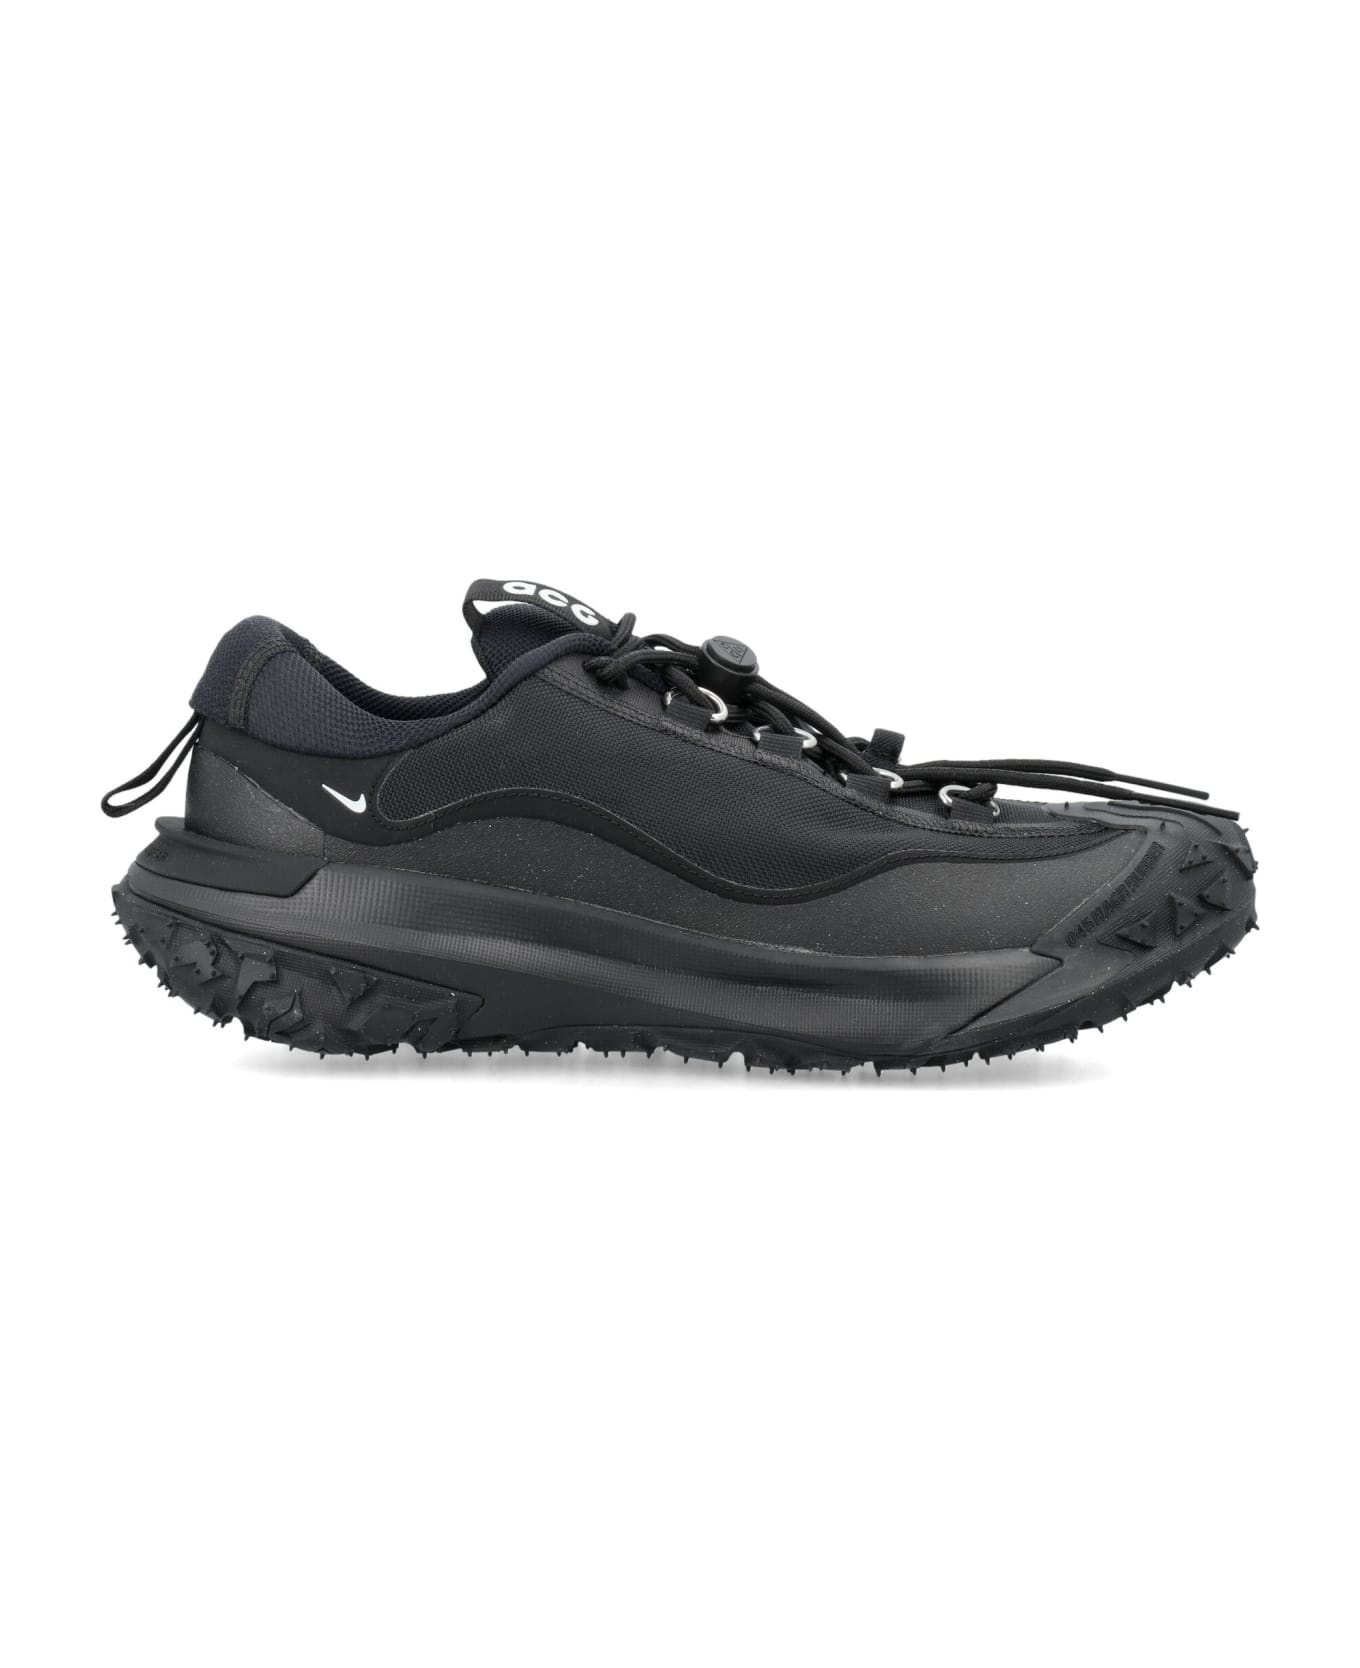 Acg Mountain Fly 2 Low - 1